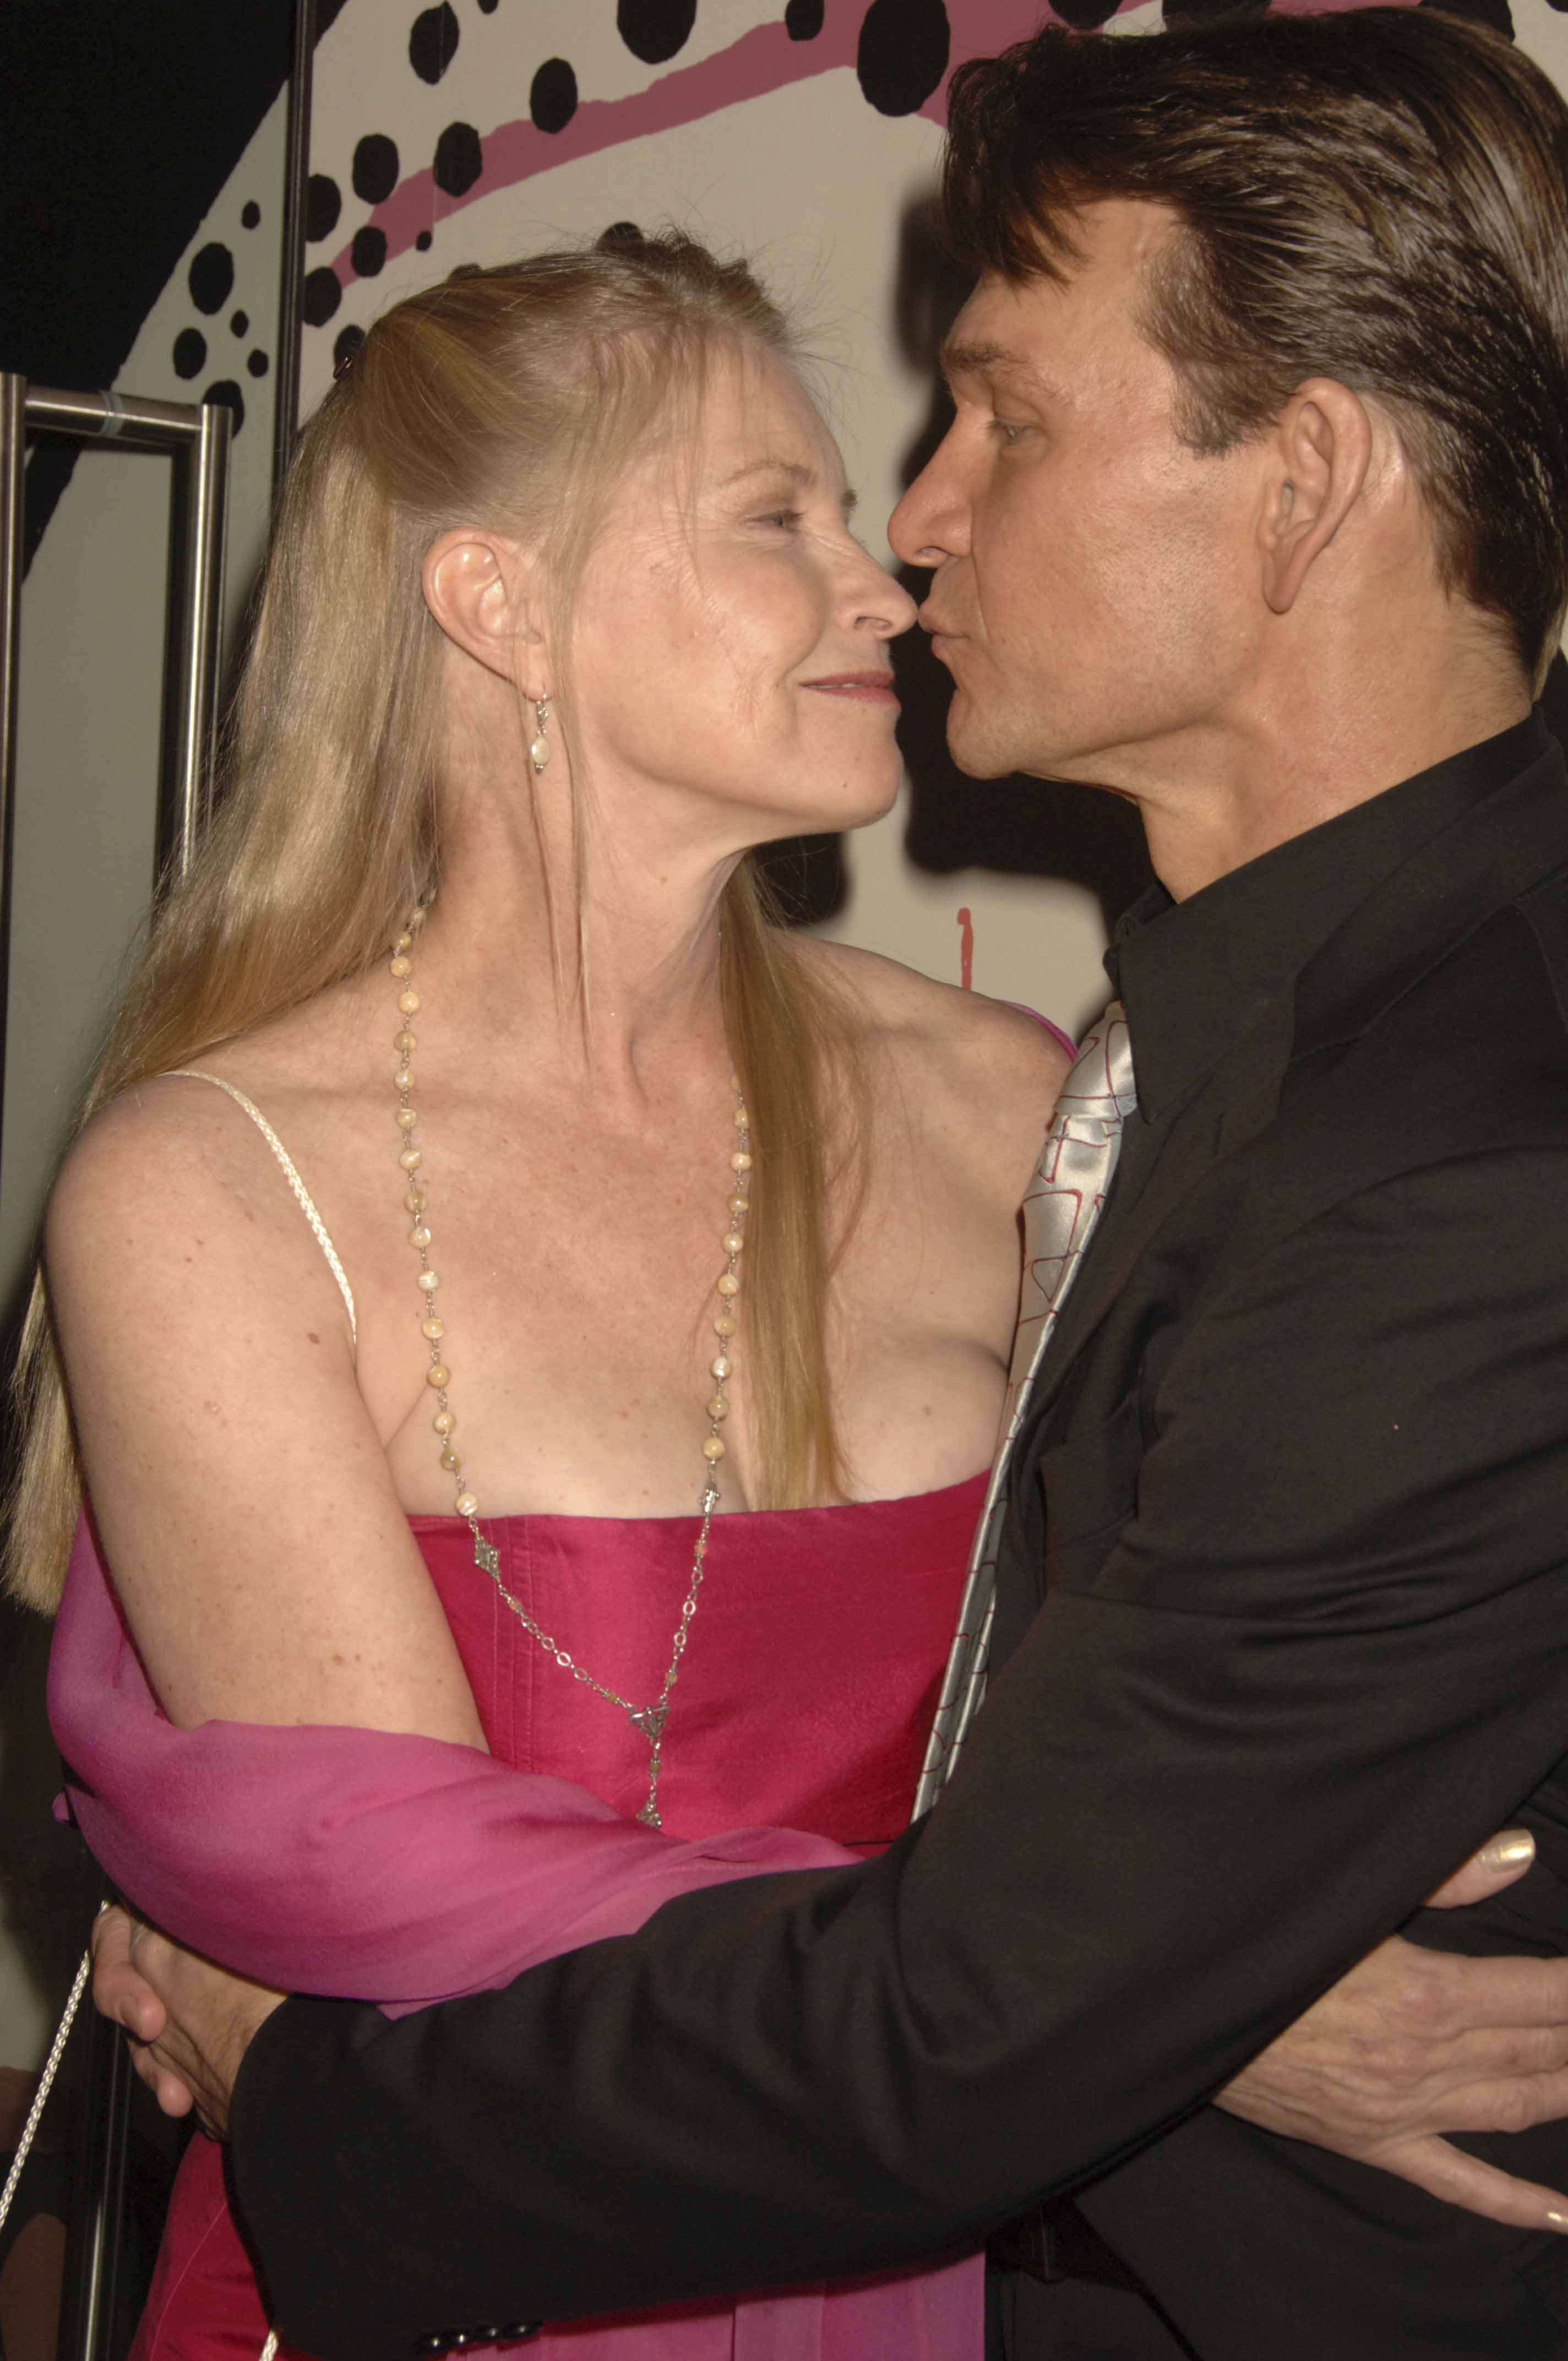 Patrick Swayze and Lisa Niemi at the attend the after party of Guys And Dolls at the Floridita on August 7, 2006 in London, England | Source: Getty Images